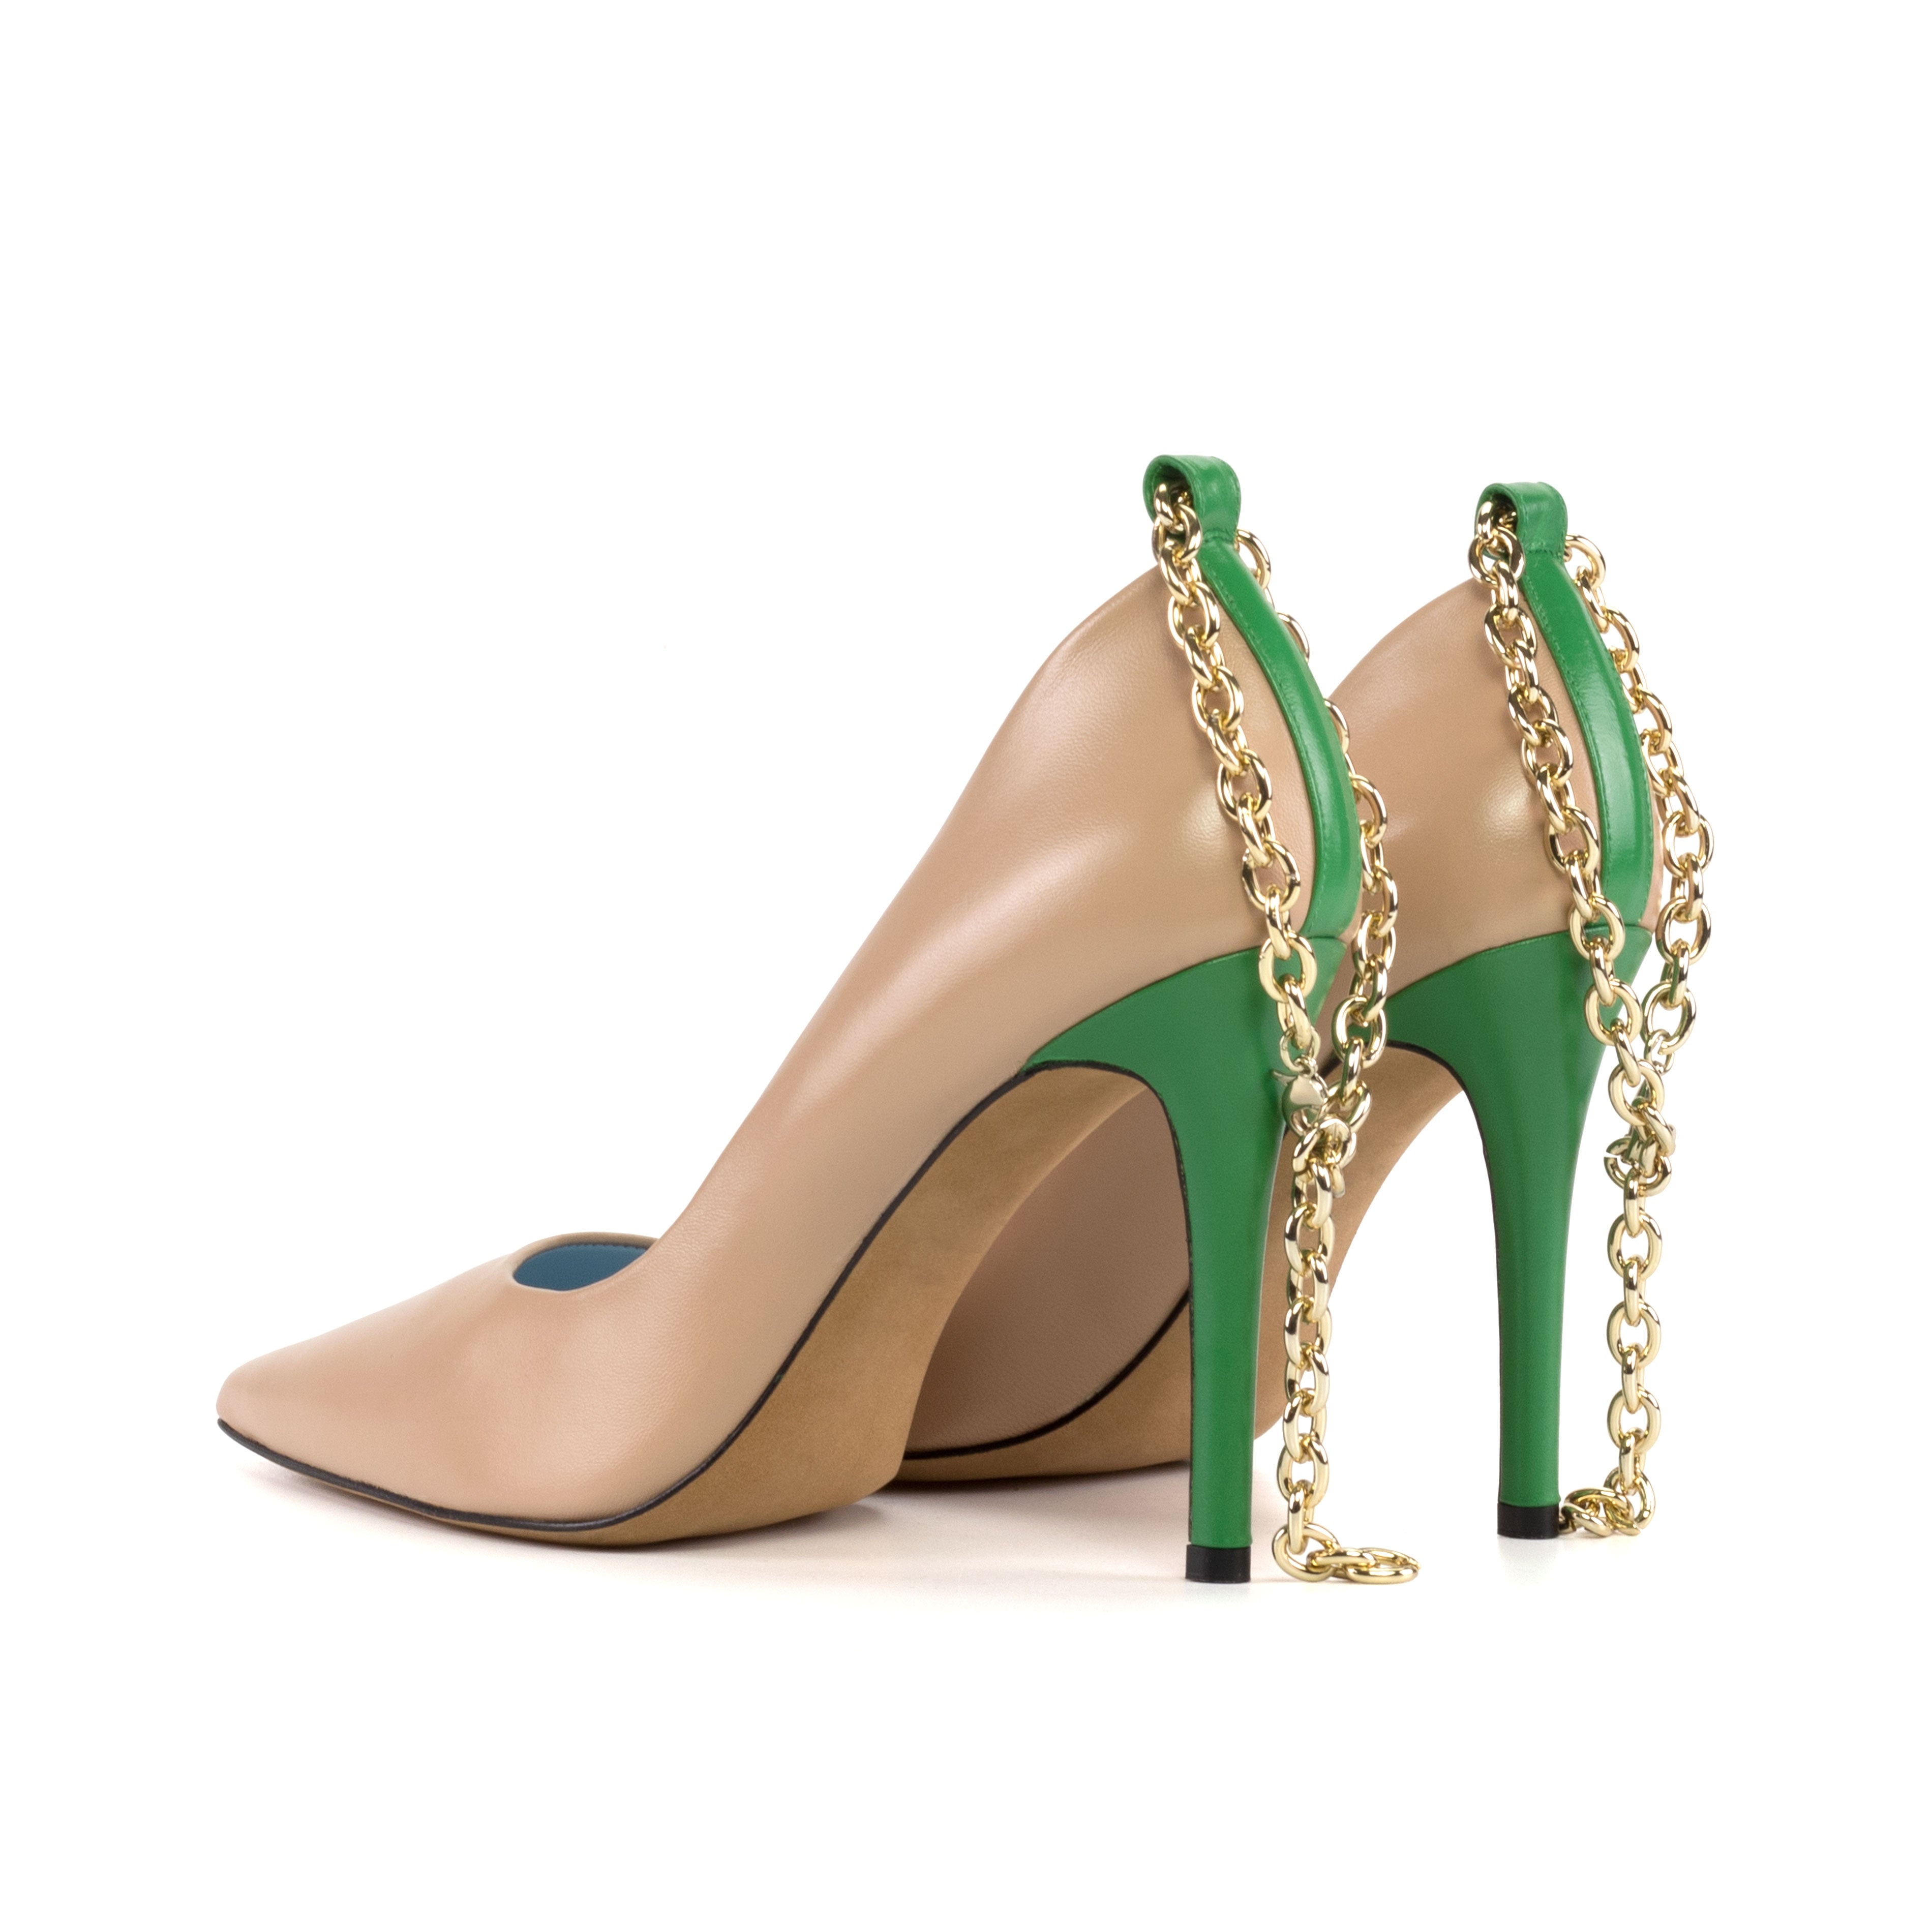 Ankle Chain Pumps (Nude/Green)